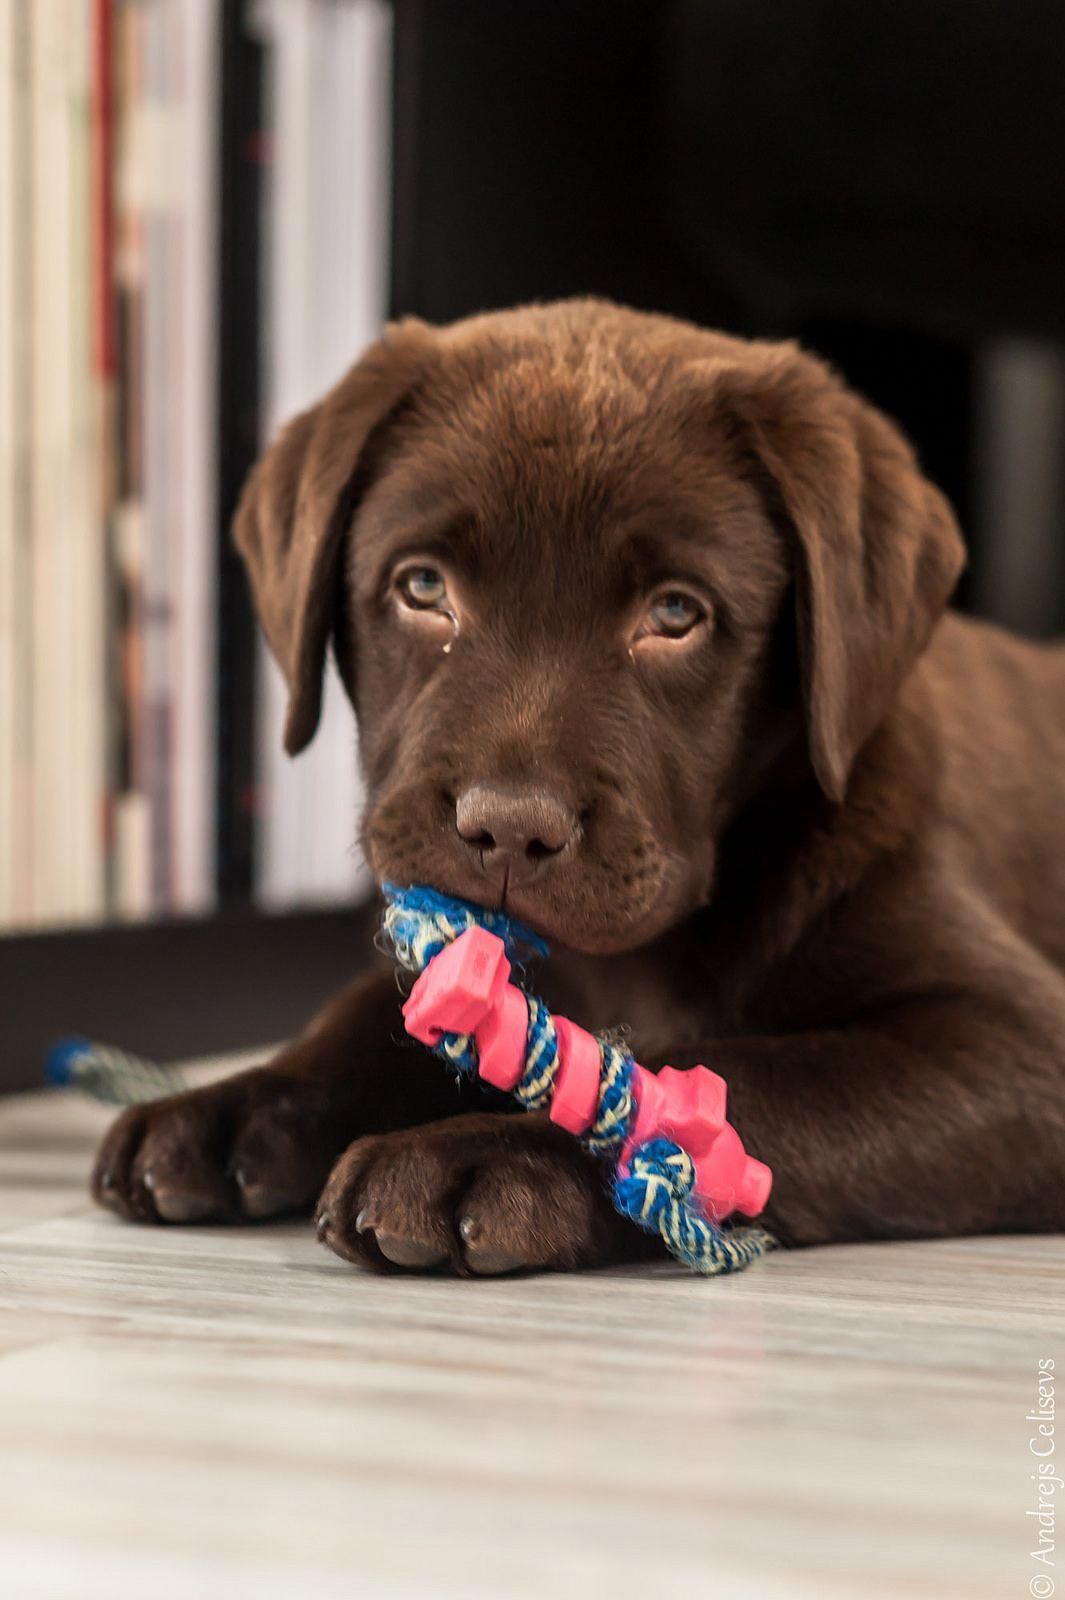 A chocolate Labrador puppy lying on the floor with a toy in its mouth